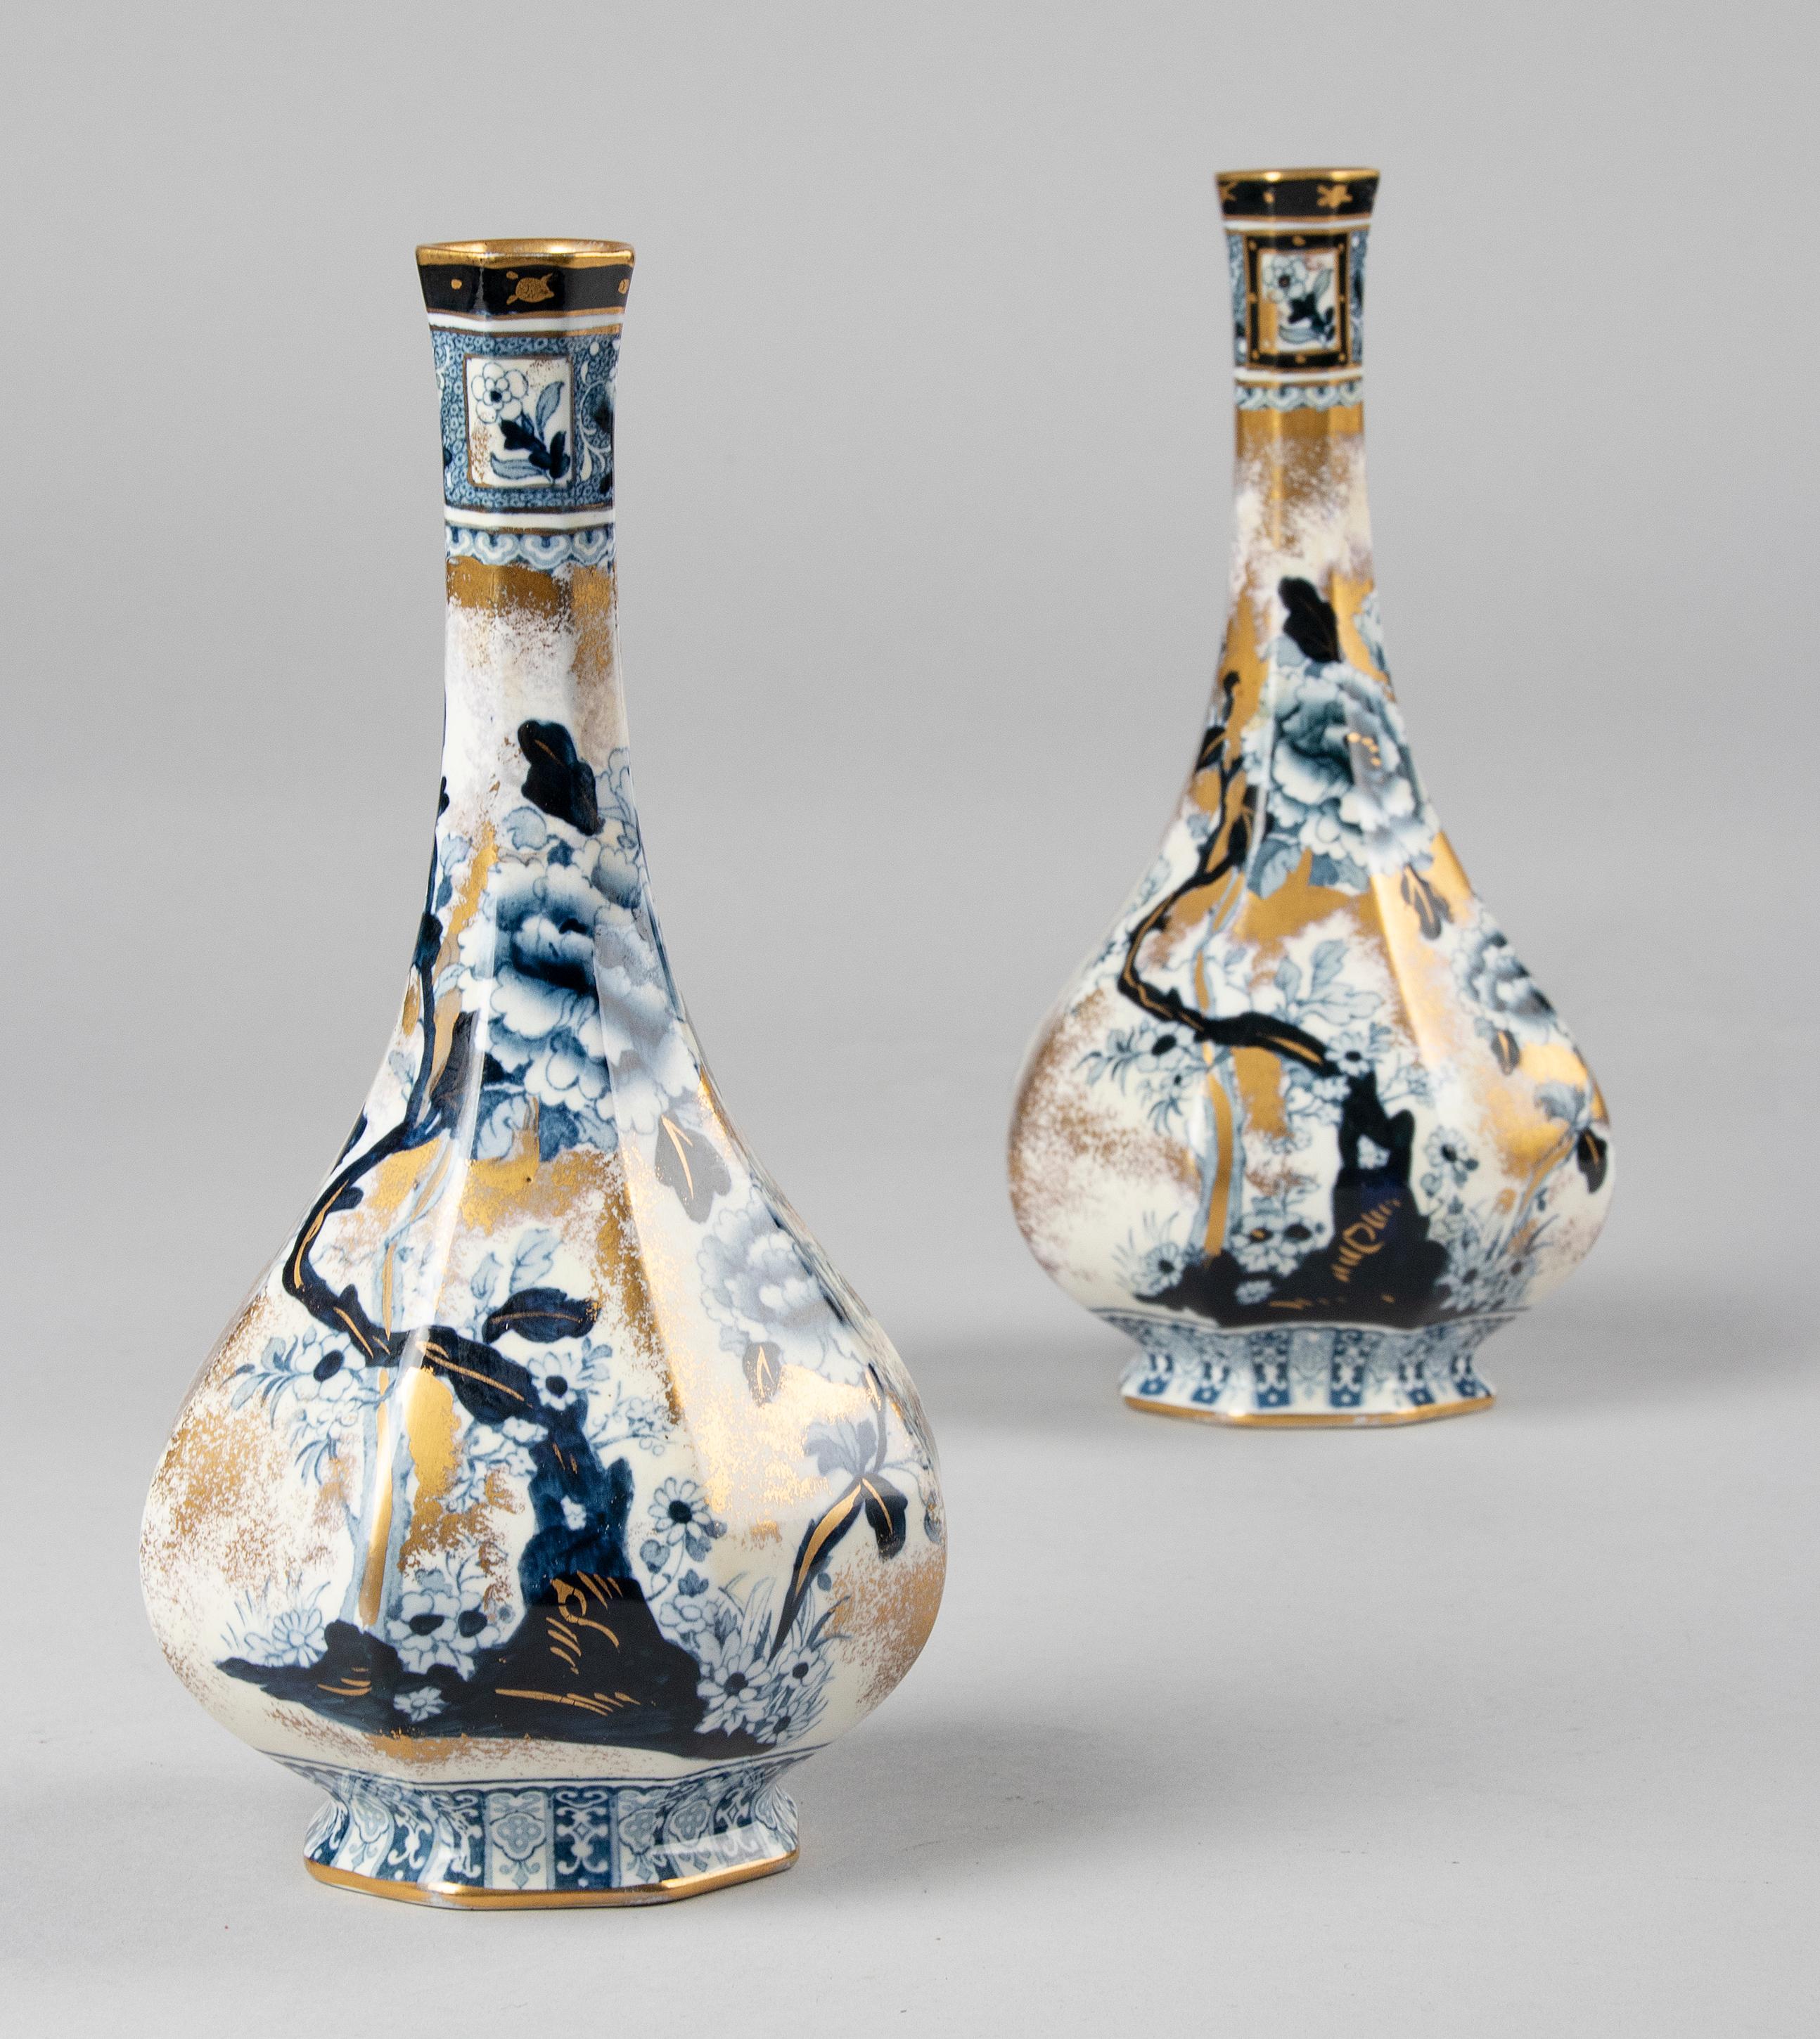 A beautiful pair of antique vases from the English brand Keeling & Co, Chusan Losol Ware. The vases have a beautiful design with a narrow tapering neck and angular shapes. The vases are decorated with cobalt blue flowers and gold colored accents.